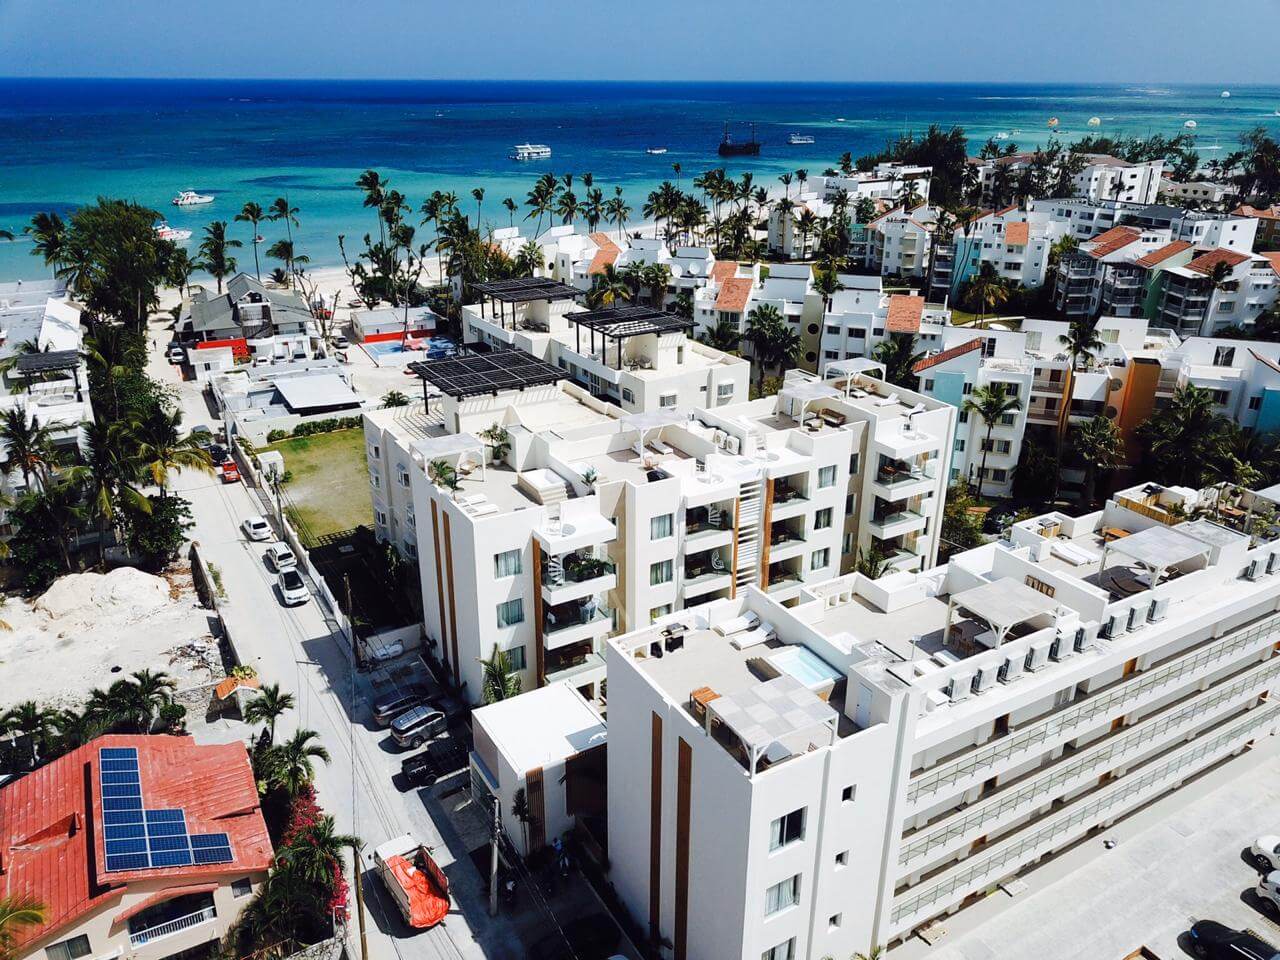 SOLD OUT! Sophisticated  2 BR.  Condos, 1 Minute From The Beach. Bavaro, Dominican Republic